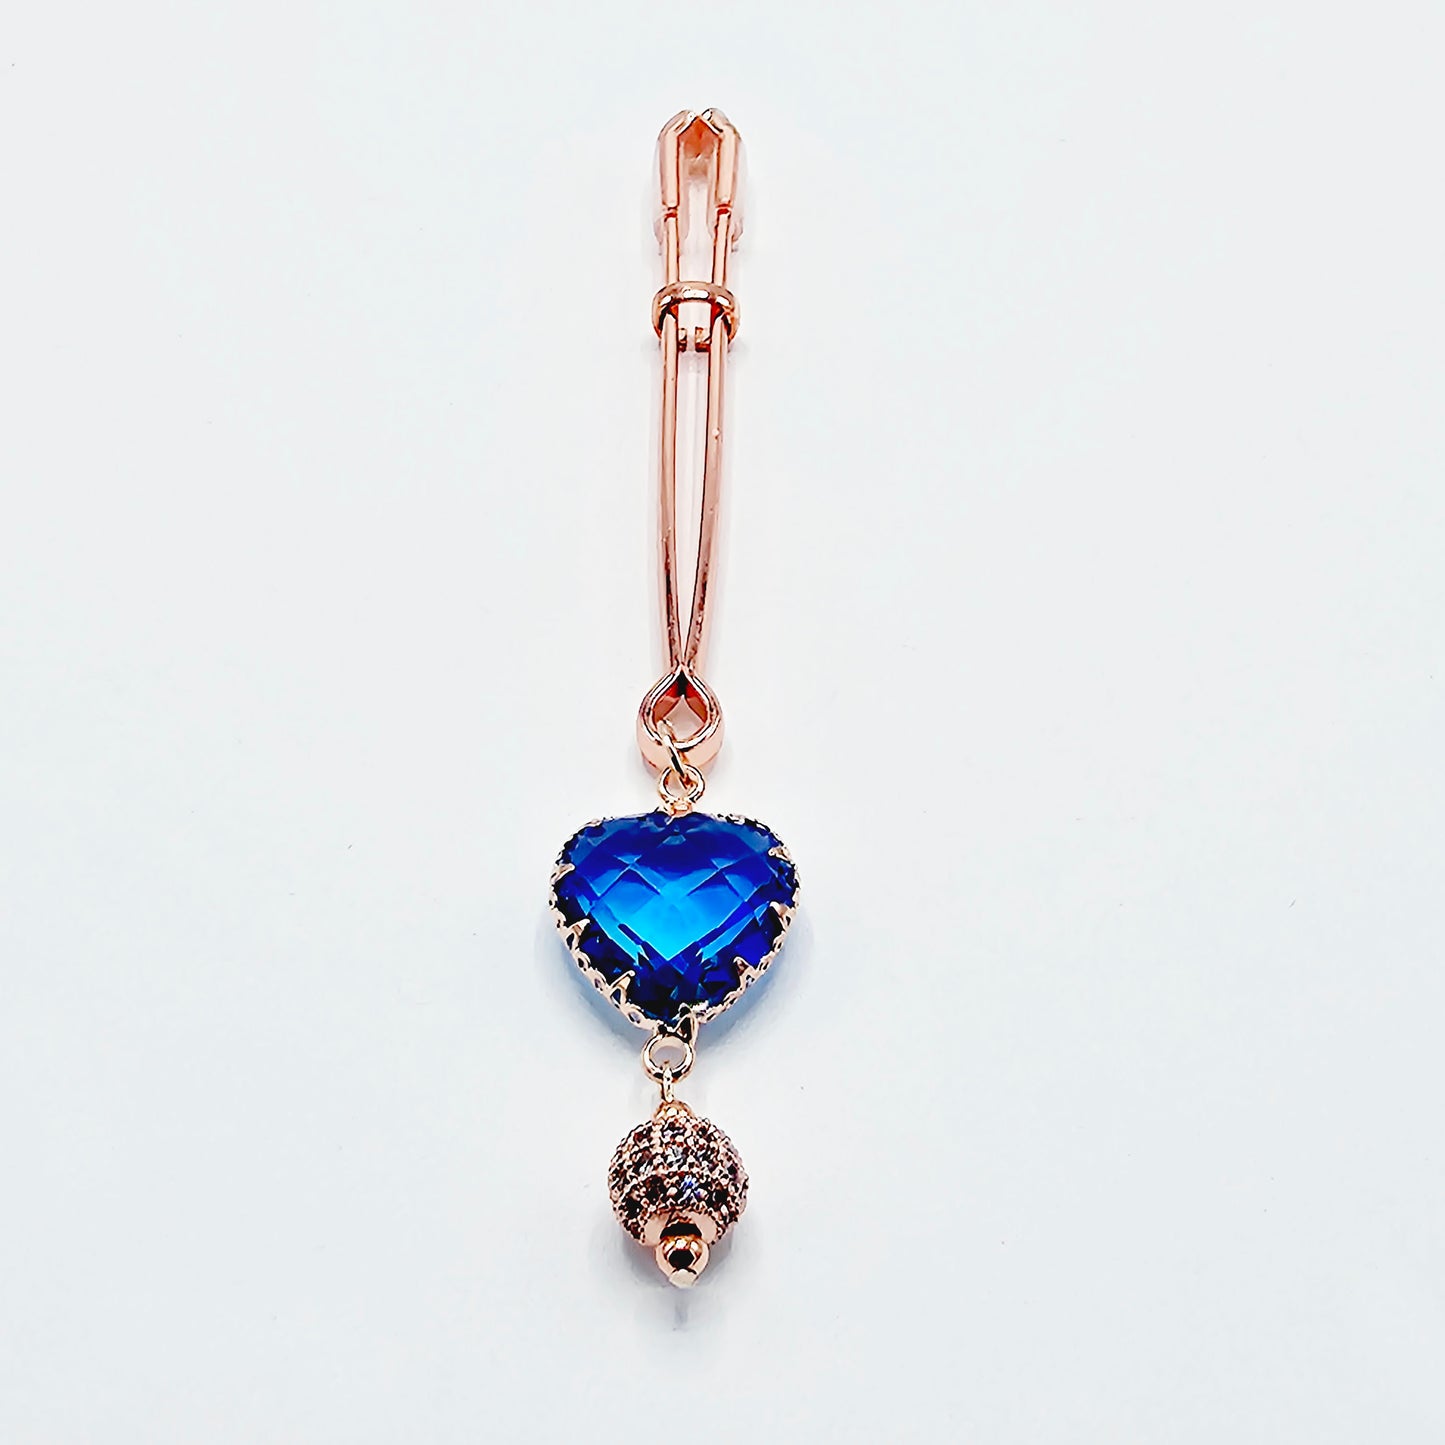 Clit Clamp with Heart, Rose Gold, and Rhinestones. Clitoral Clamp